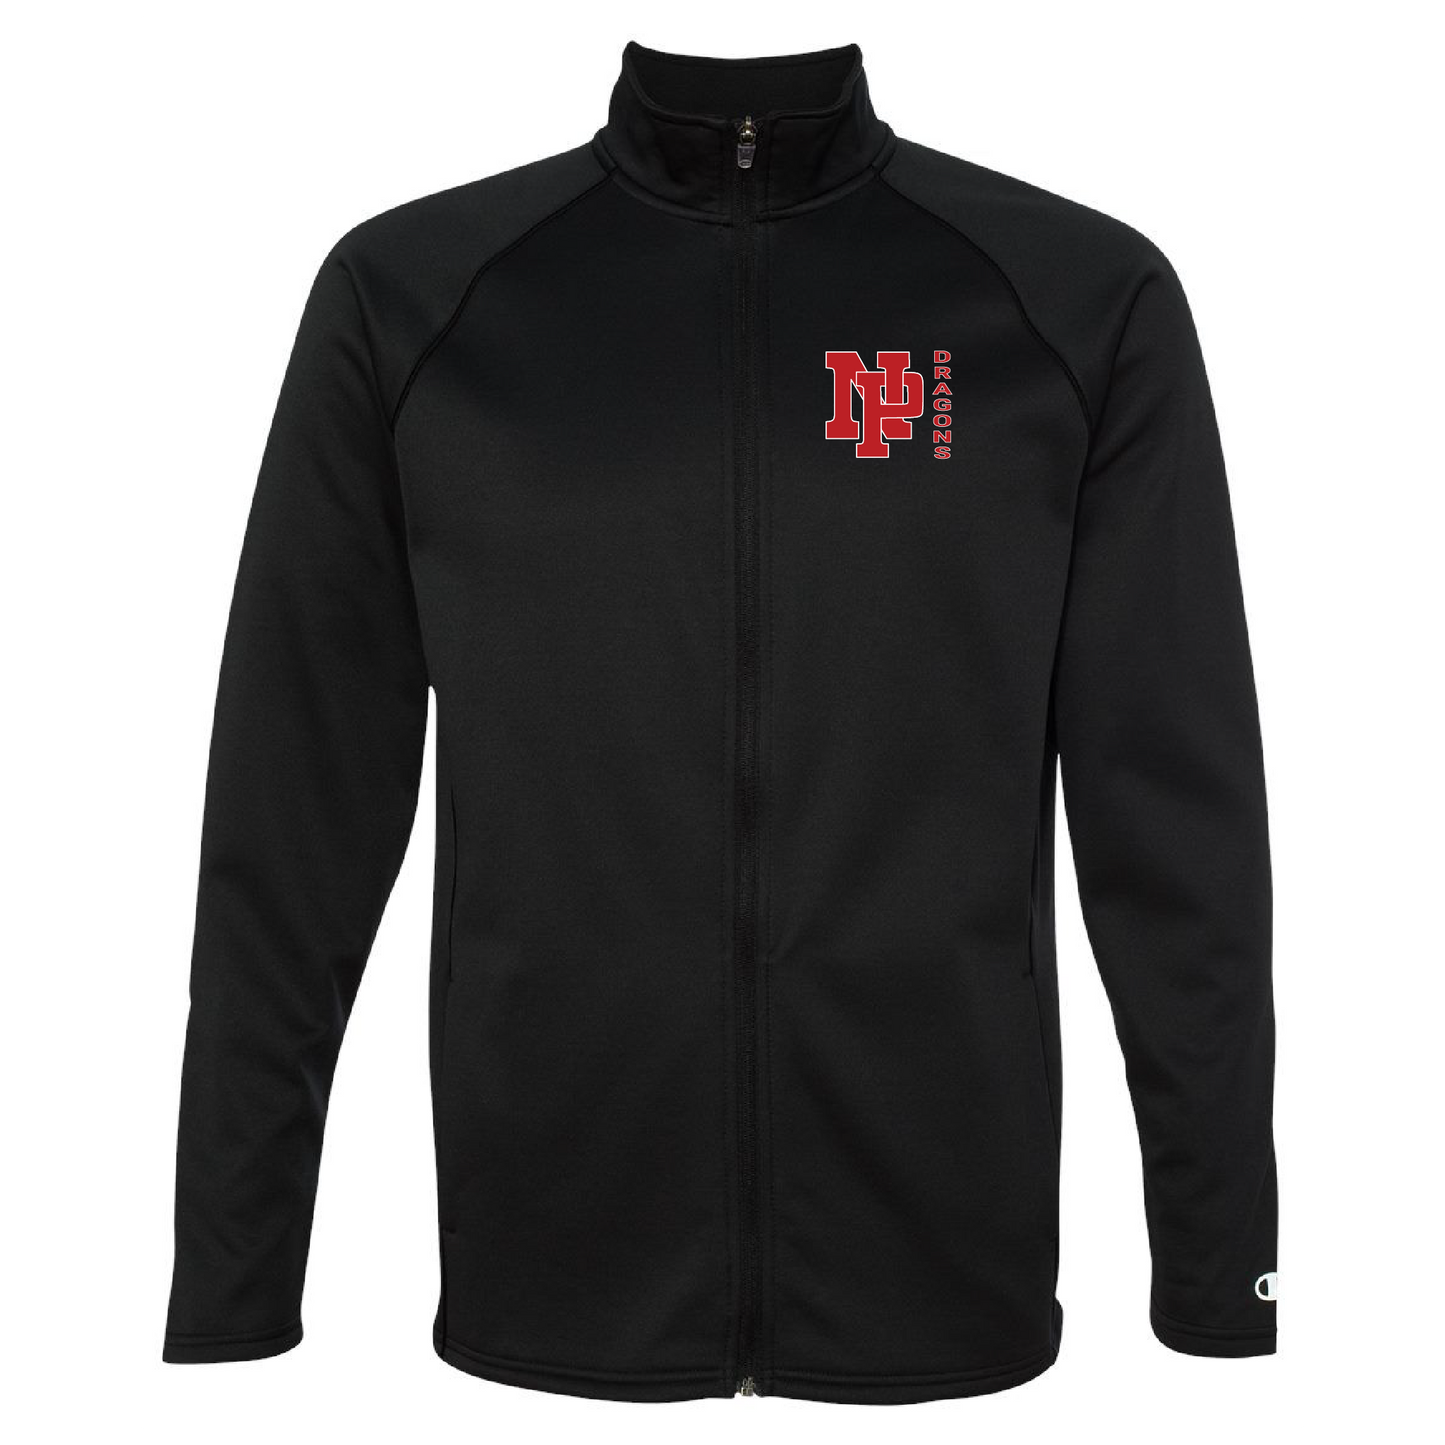 Unisex Performance Fleece Full-Zip Jacket - Red NP DRAGONS, side by side